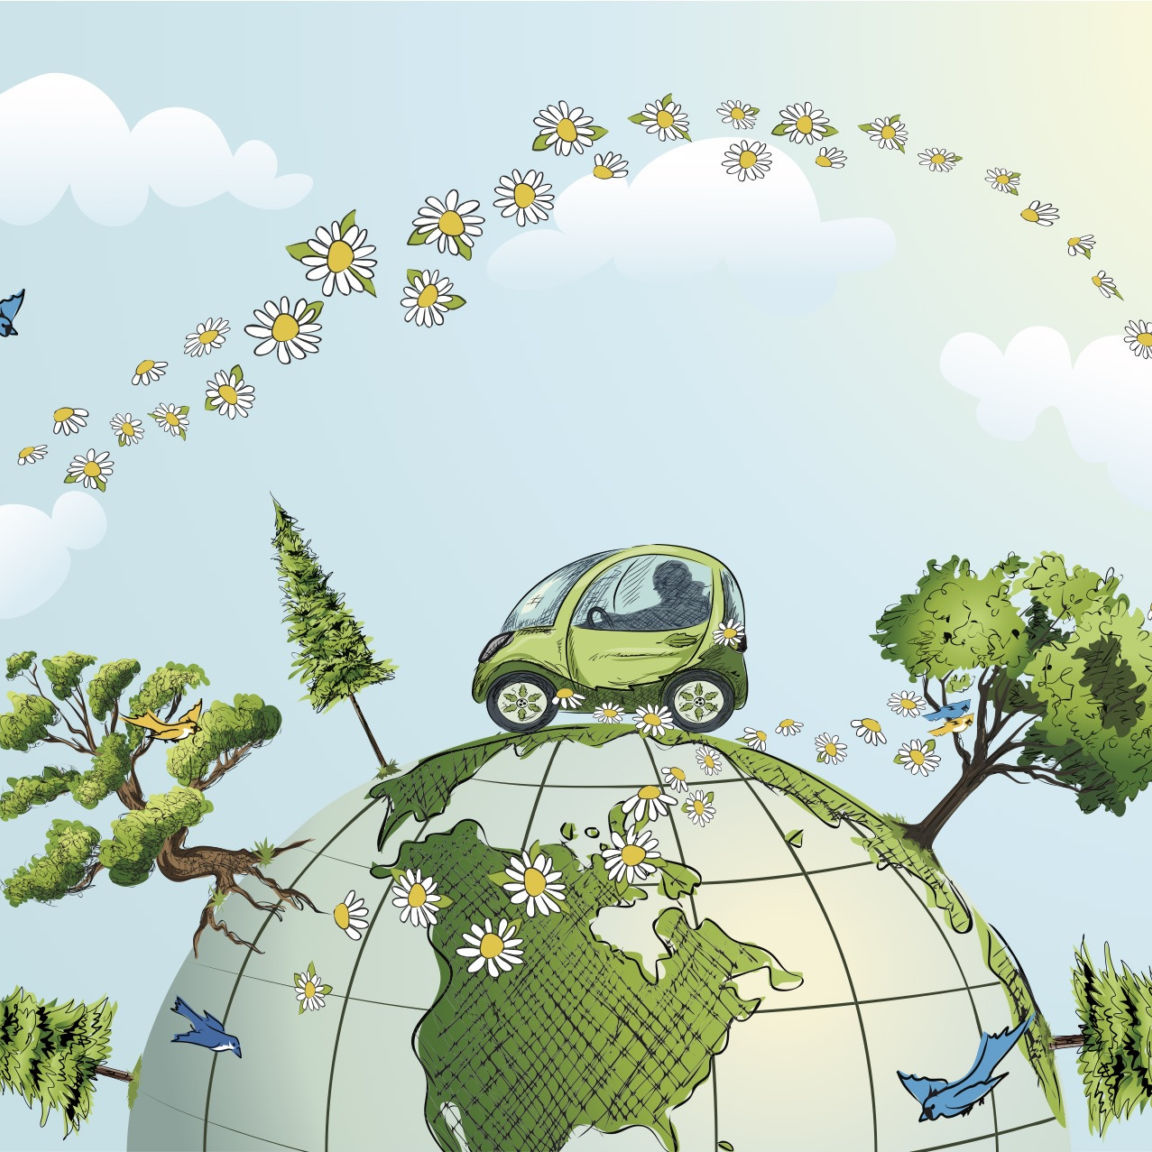 Car Driving Over Globe with Trees Flowers and Birds 96420121 4636x3593